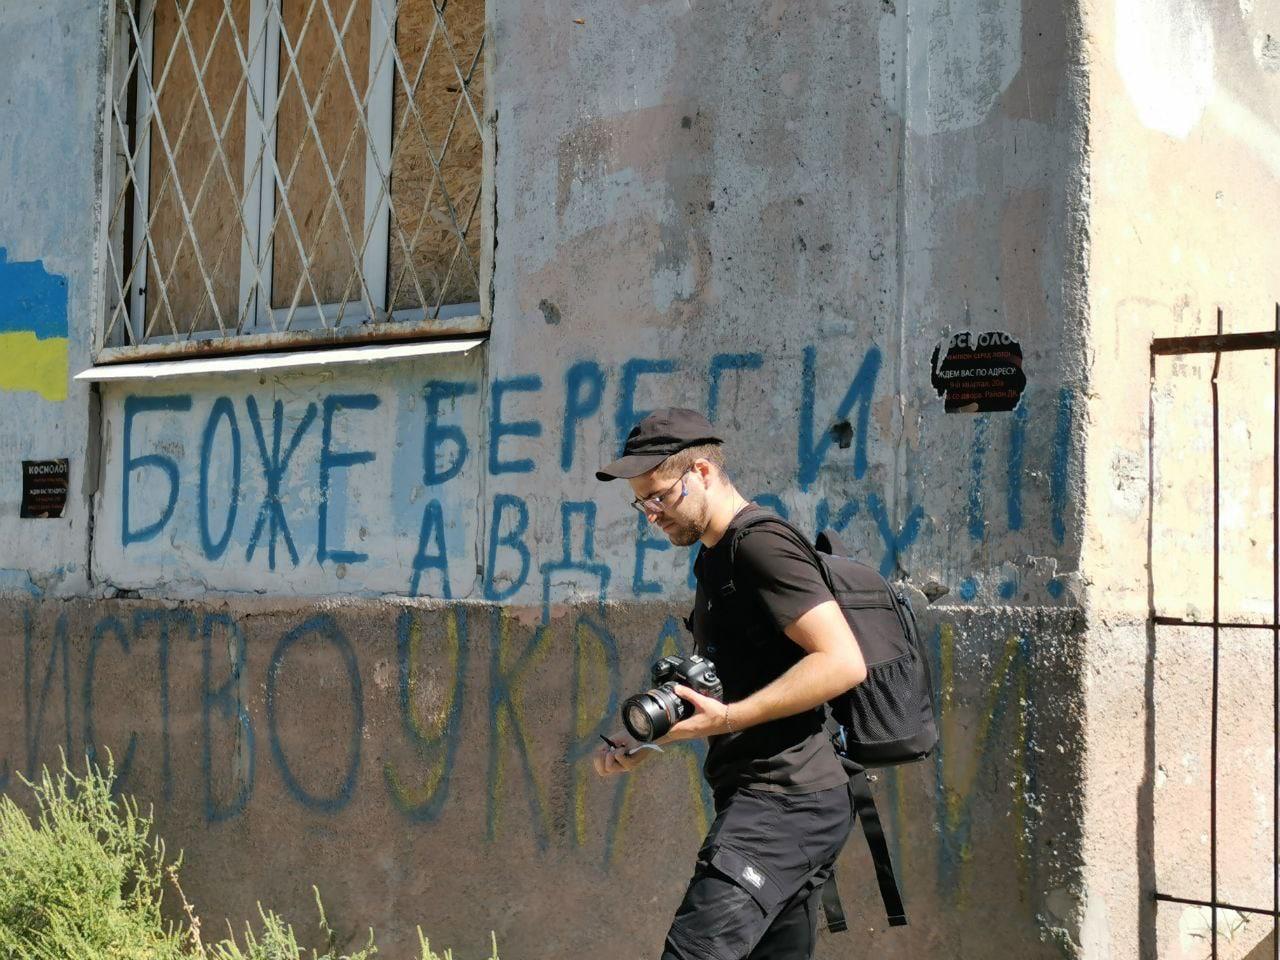 A man walks carrying a camera, looking at the floor. Behind him is a building with graffiti in Ukrainian, including a Ukrainian flag.